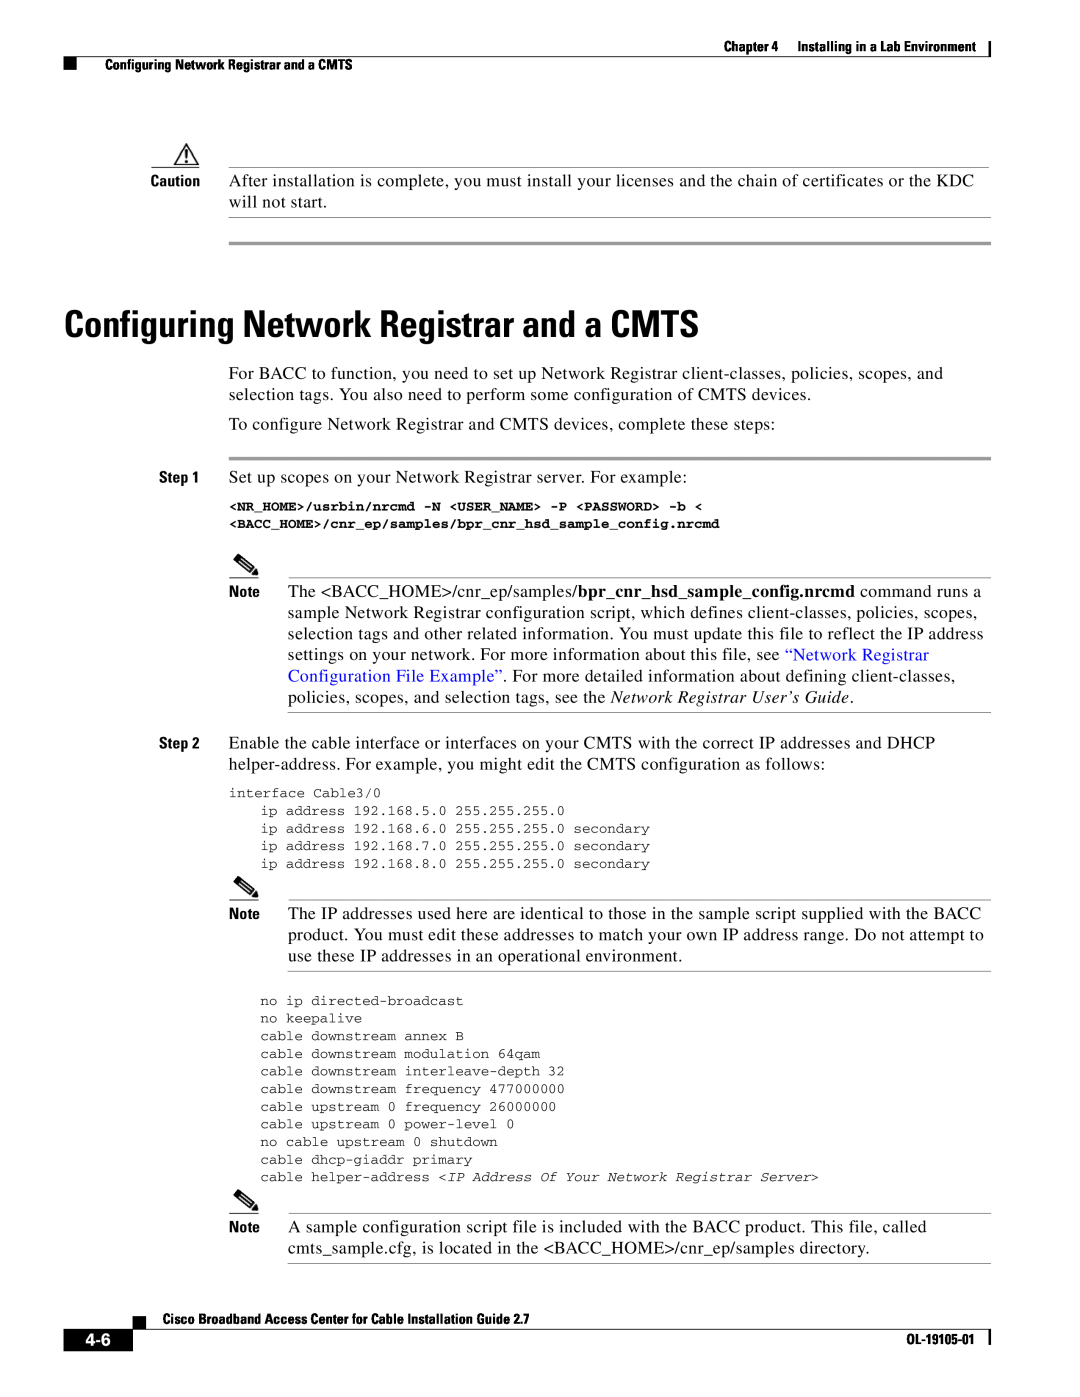 Cisco Systems Broadband Access Center manual Configuring Network Registrar and a CMTS 